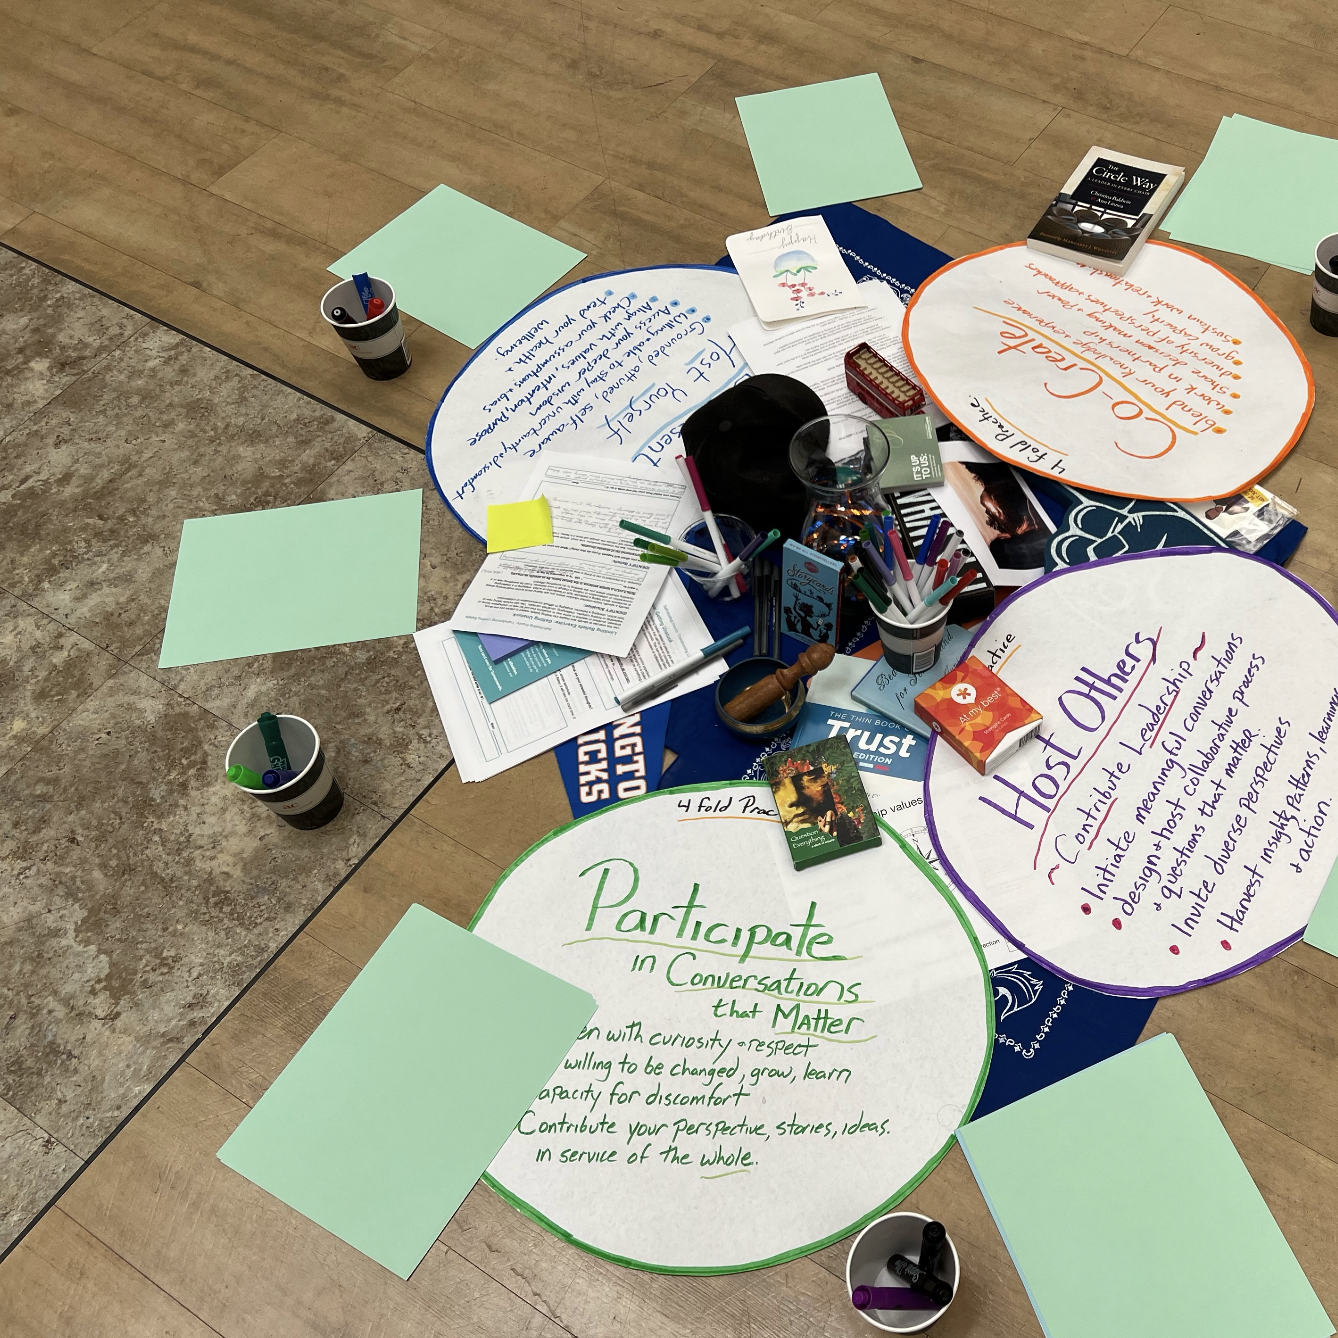 participative leadership activity paper with writing and items arranged in circle on wood floor near corner of a rug